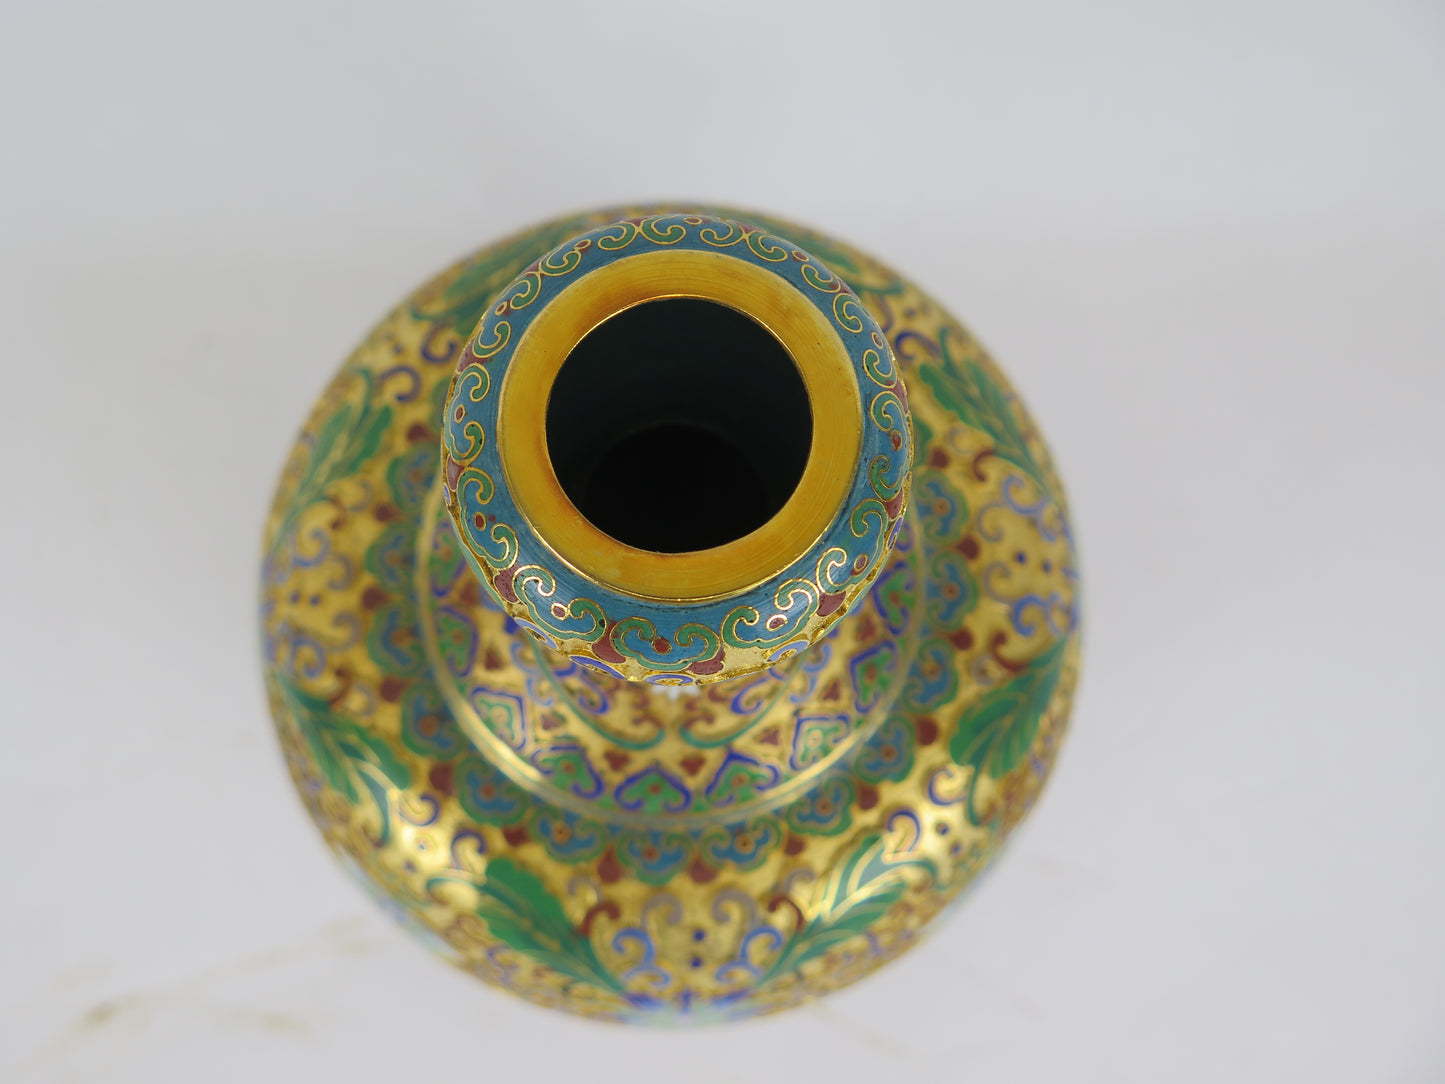 Vintage Chinese cloisonné vase China Asia rare collectible multicolored vase CM1